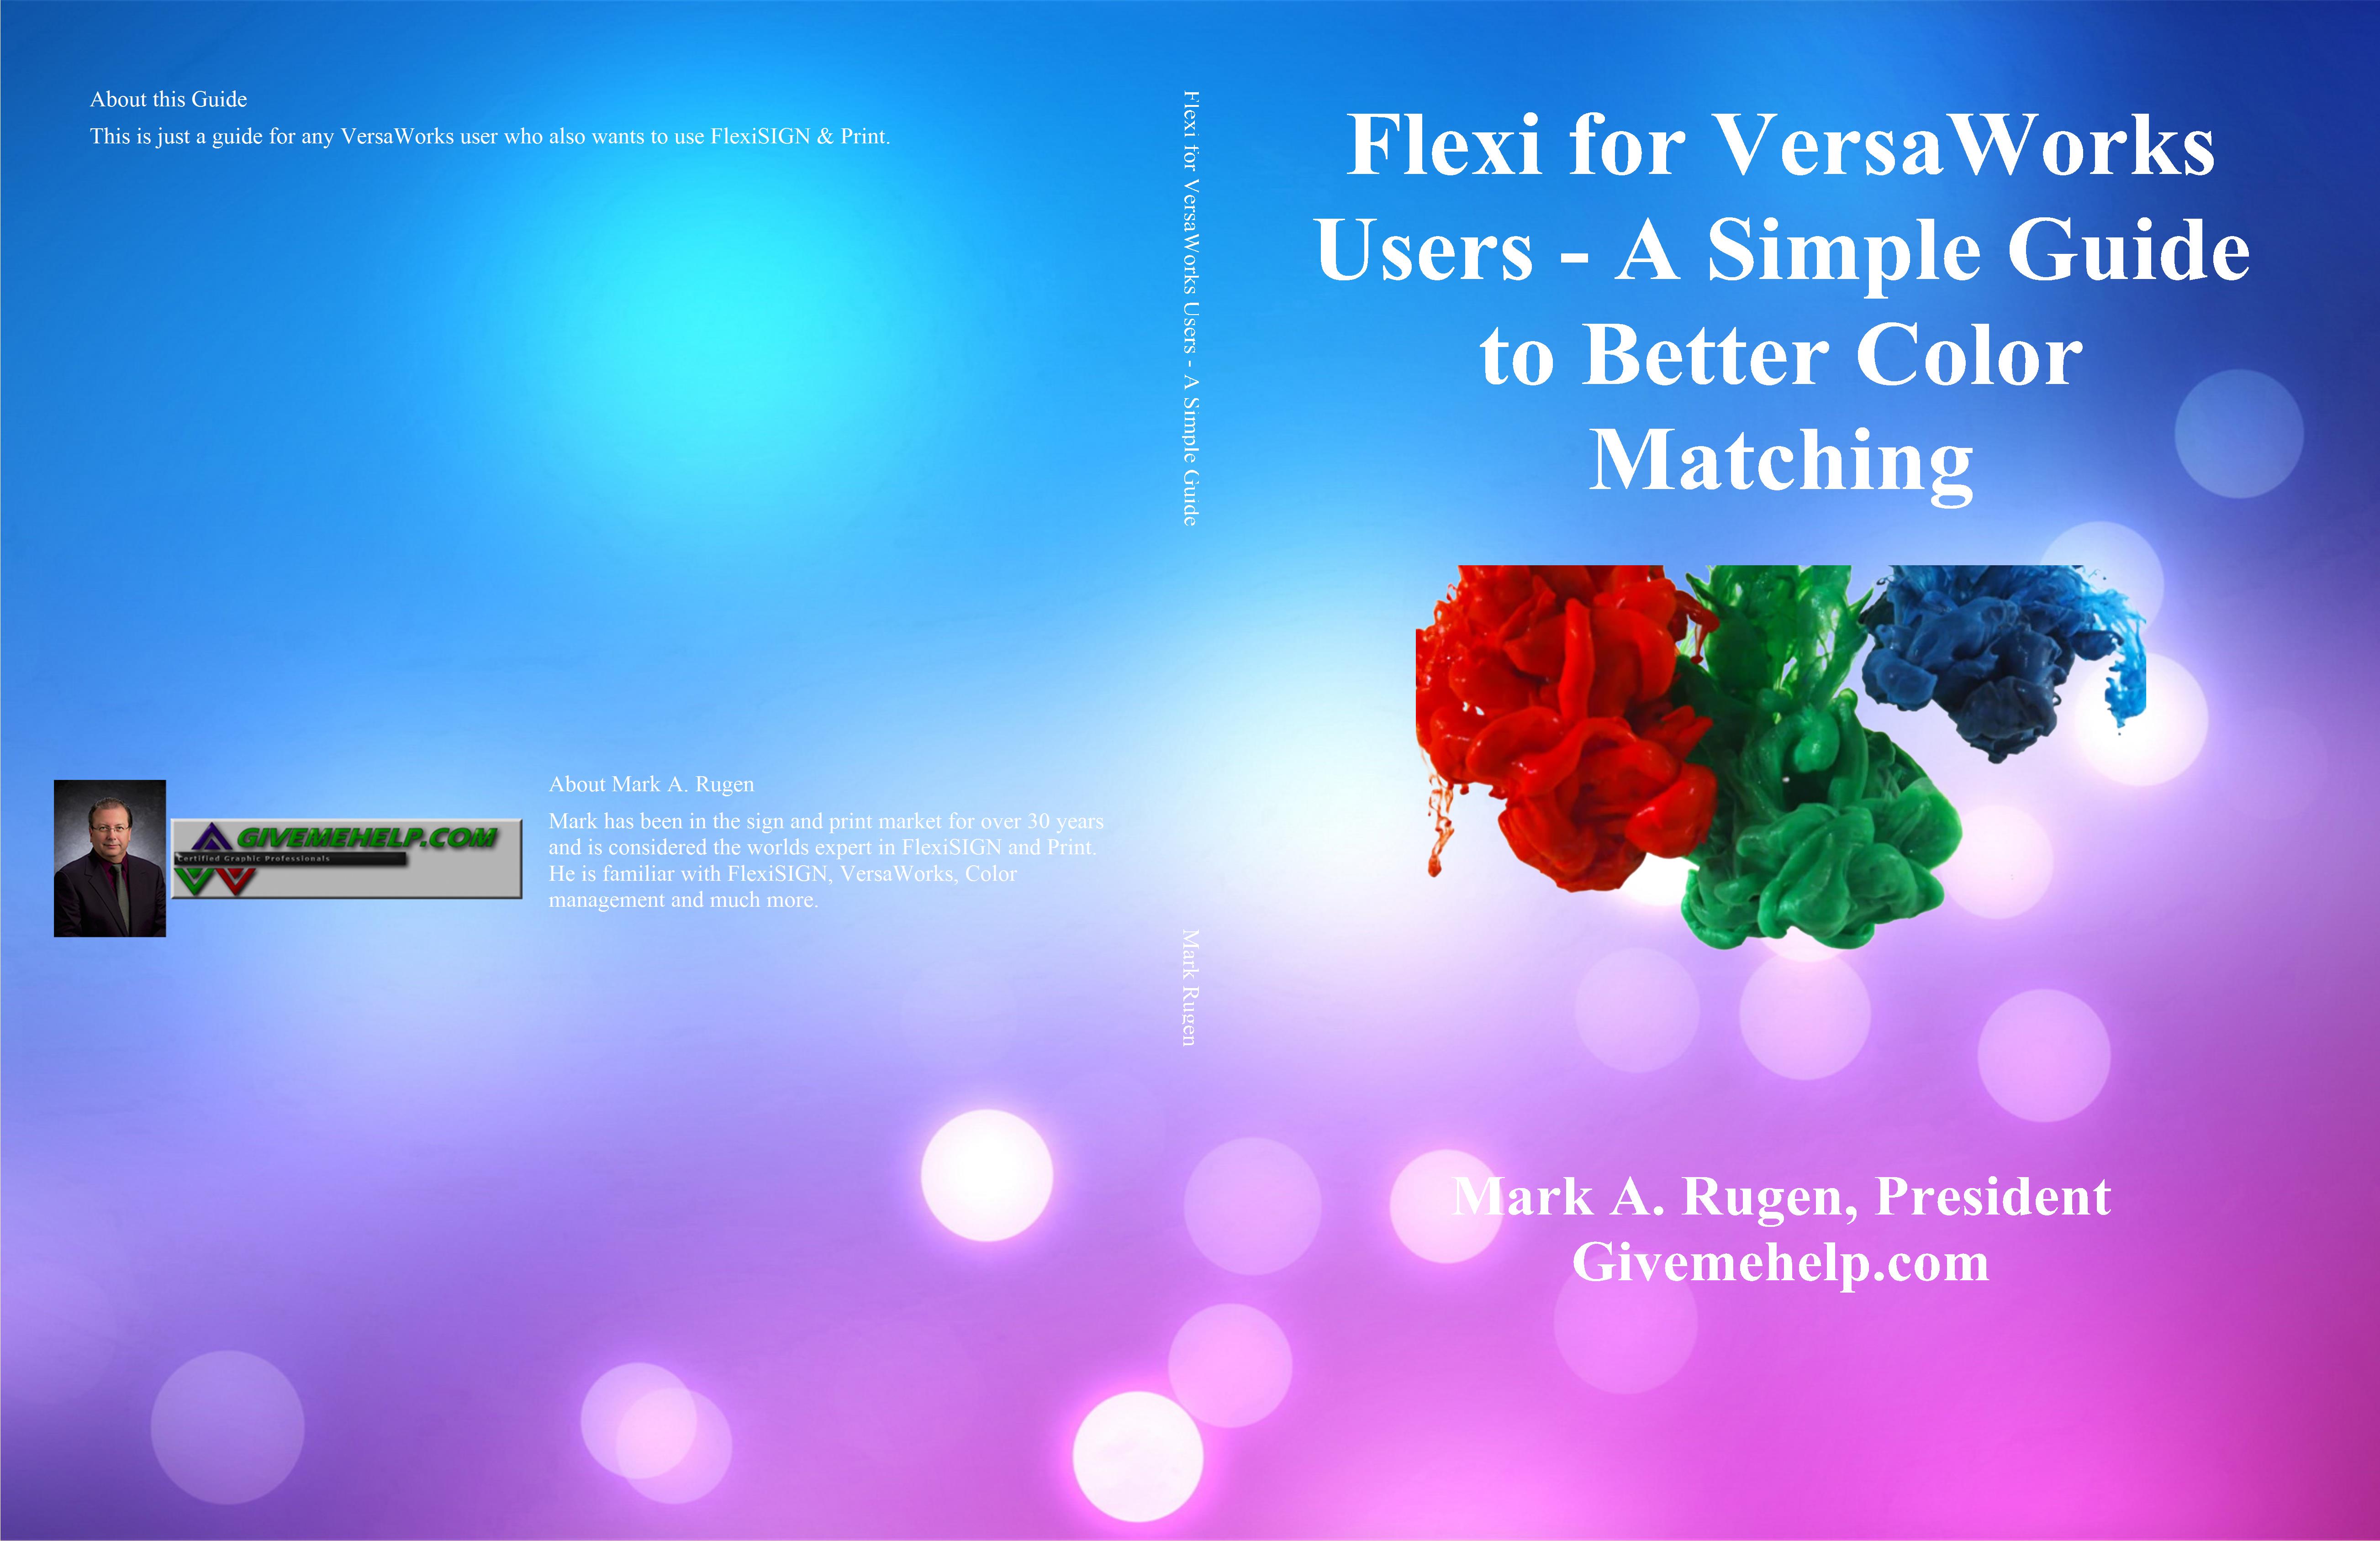 Flexi for VersaWorks Users - A Simple Guide to Better Color Matching cover image